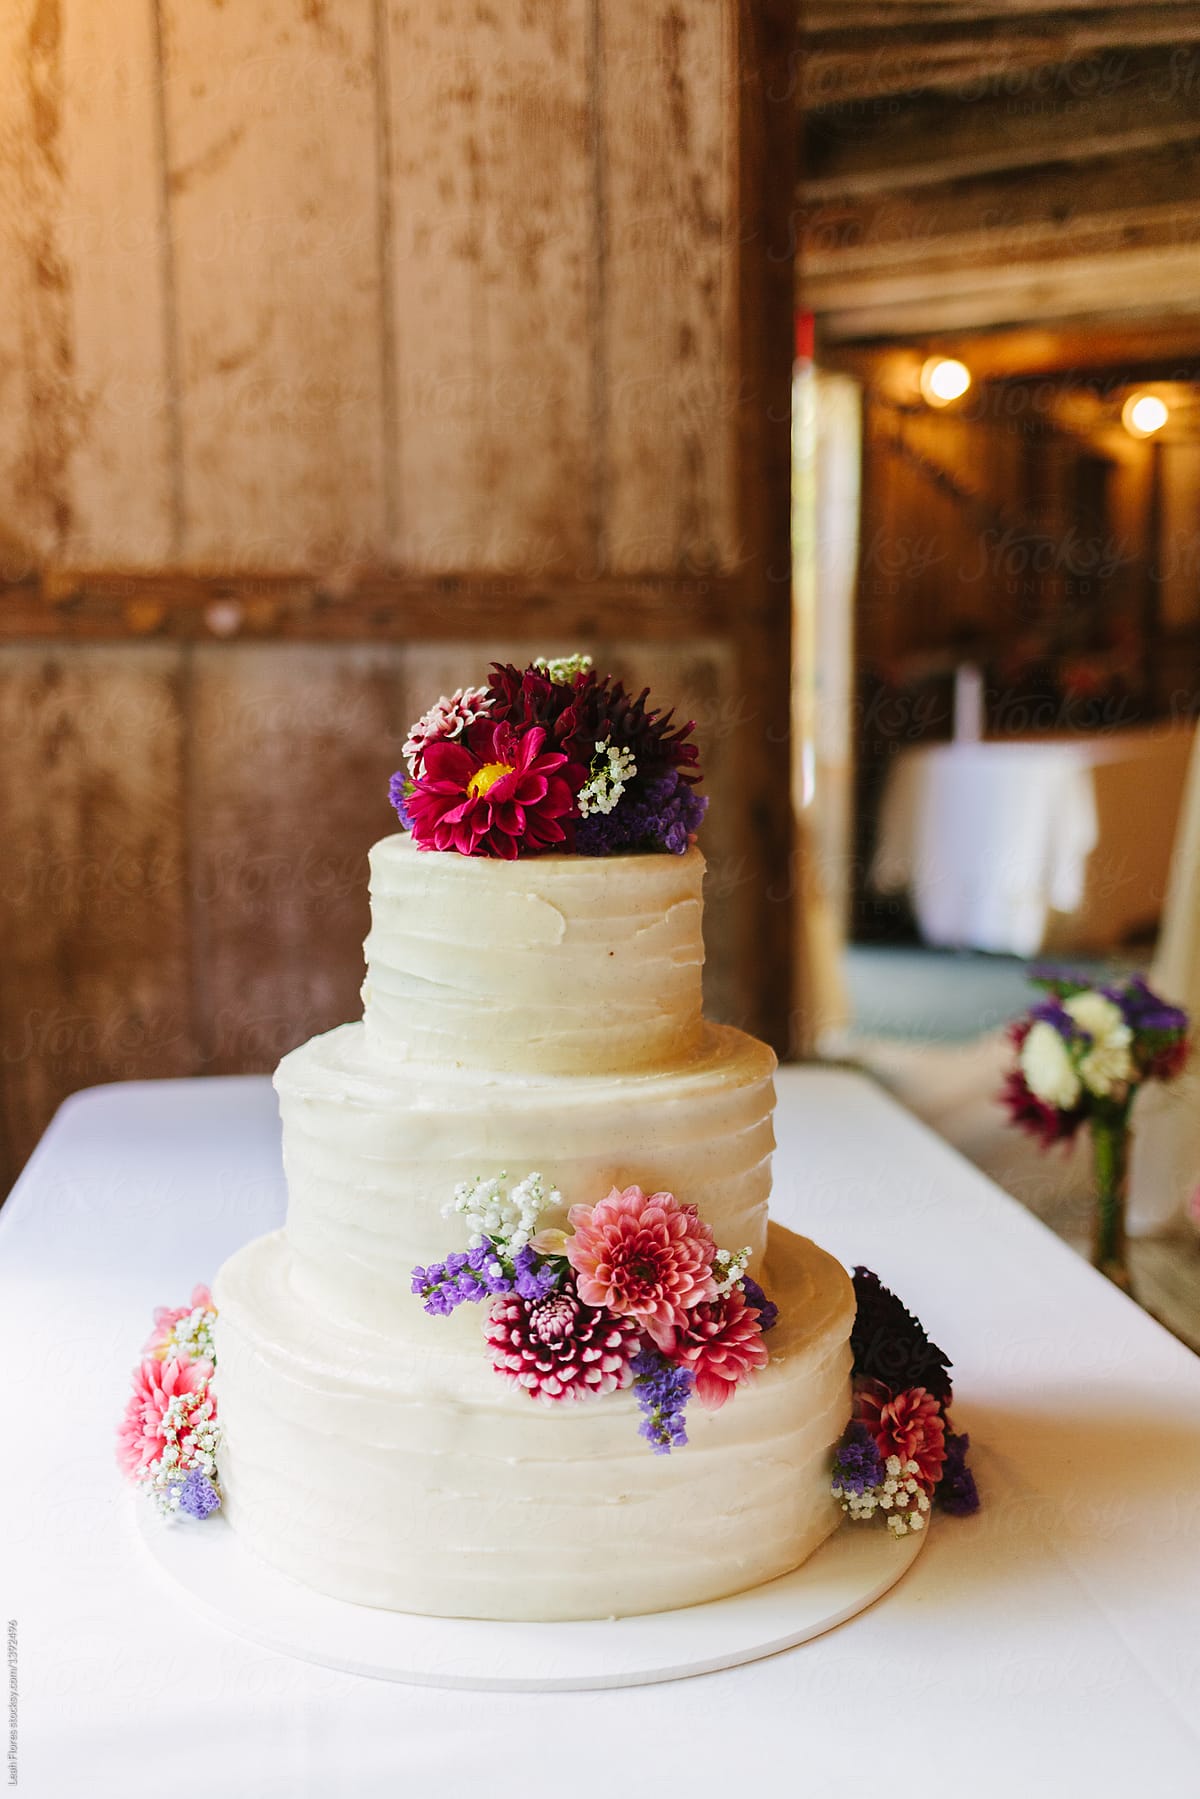 Cake at Wedding Covered in Pink and Purple Flowers